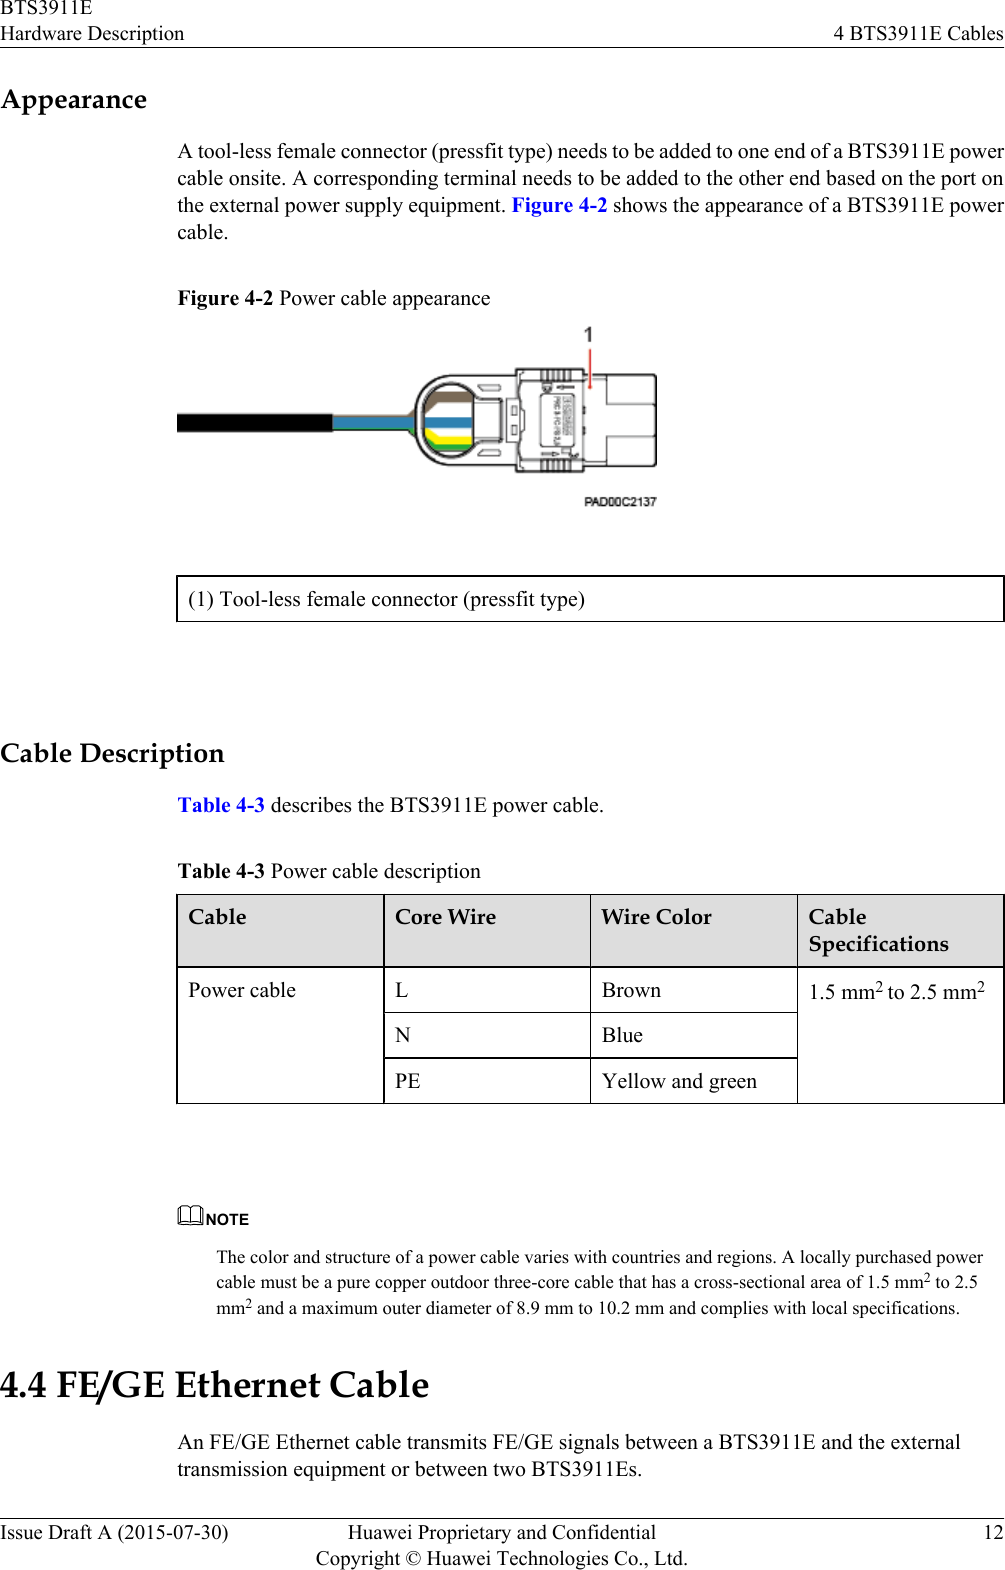 AppearanceA tool-less female connector (pressfit type) needs to be added to one end of a BTS3911E powercable onsite. A corresponding terminal needs to be added to the other end based on the port onthe external power supply equipment. Figure 4-2 shows the appearance of a BTS3911E powercable.Figure 4-2 Power cable appearance(1) Tool-less female connector (pressfit type) Cable DescriptionTable 4-3 describes the BTS3911E power cable.Table 4-3 Power cable descriptionCable Core Wire Wire Color CableSpecificationsPower cable L Brown 1.5 mm2 to 2.5 mm2N BluePE Yellow and green NOTEThe color and structure of a power cable varies with countries and regions. A locally purchased powercable must be a pure copper outdoor three-core cable that has a cross-sectional area of 1.5 mm2 to 2.5mm2 and a maximum outer diameter of 8.9 mm to 10.2 mm and complies with local specifications.4.4 FE/GE Ethernet CableAn FE/GE Ethernet cable transmits FE/GE signals between a BTS3911E and the externaltransmission equipment or between two BTS3911Es.BTS3911EHardware Description 4 BTS3911E CablesIssue Draft A (2015-07-30) Huawei Proprietary and ConfidentialCopyright © Huawei Technologies Co., Ltd.12